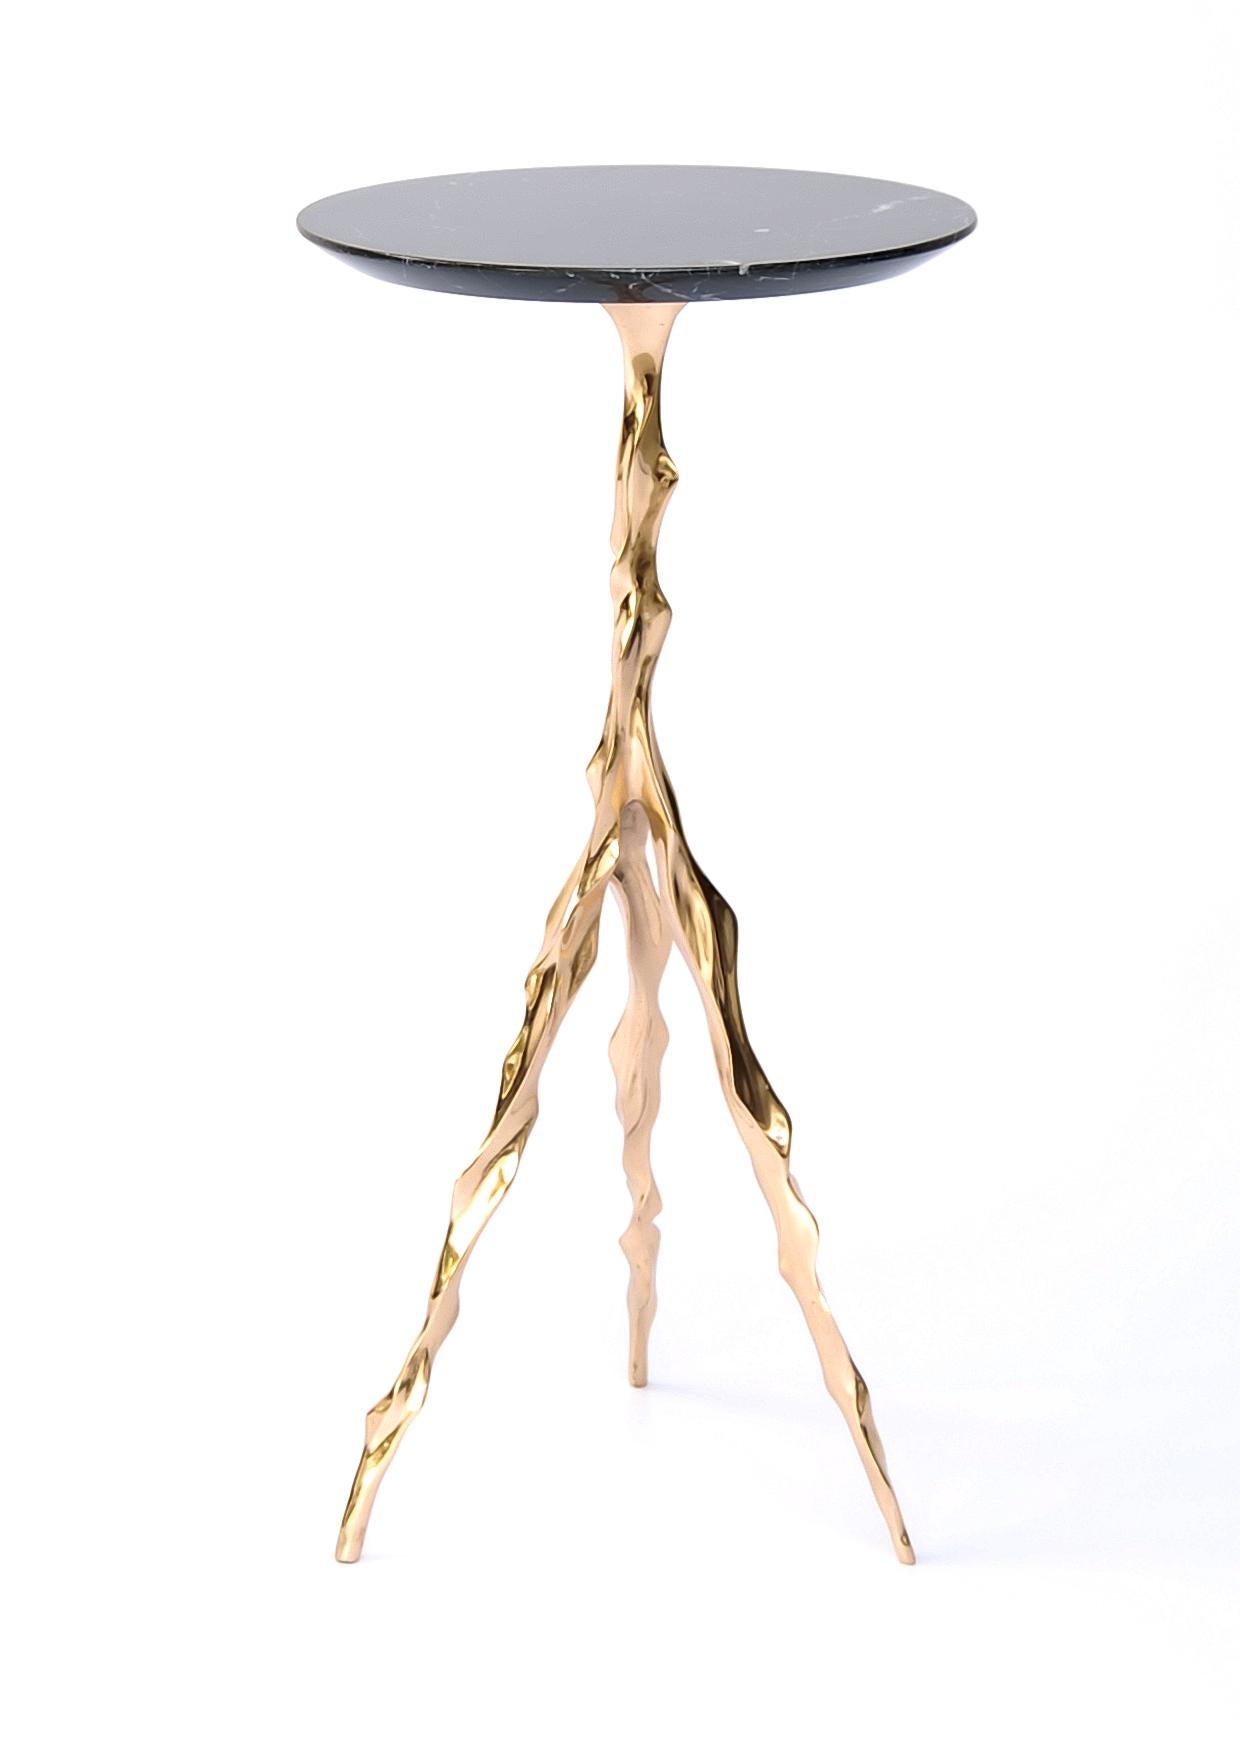 Etta drink table with nero marquina marble top by Fakasaka Design.
Dimensions: W 27 cm, D 27 cm, H 62 cm.
Materials: polished bronze base, Nero Marquina marble top.
 
Also available in different table top materials:
Nero Marquina Marble